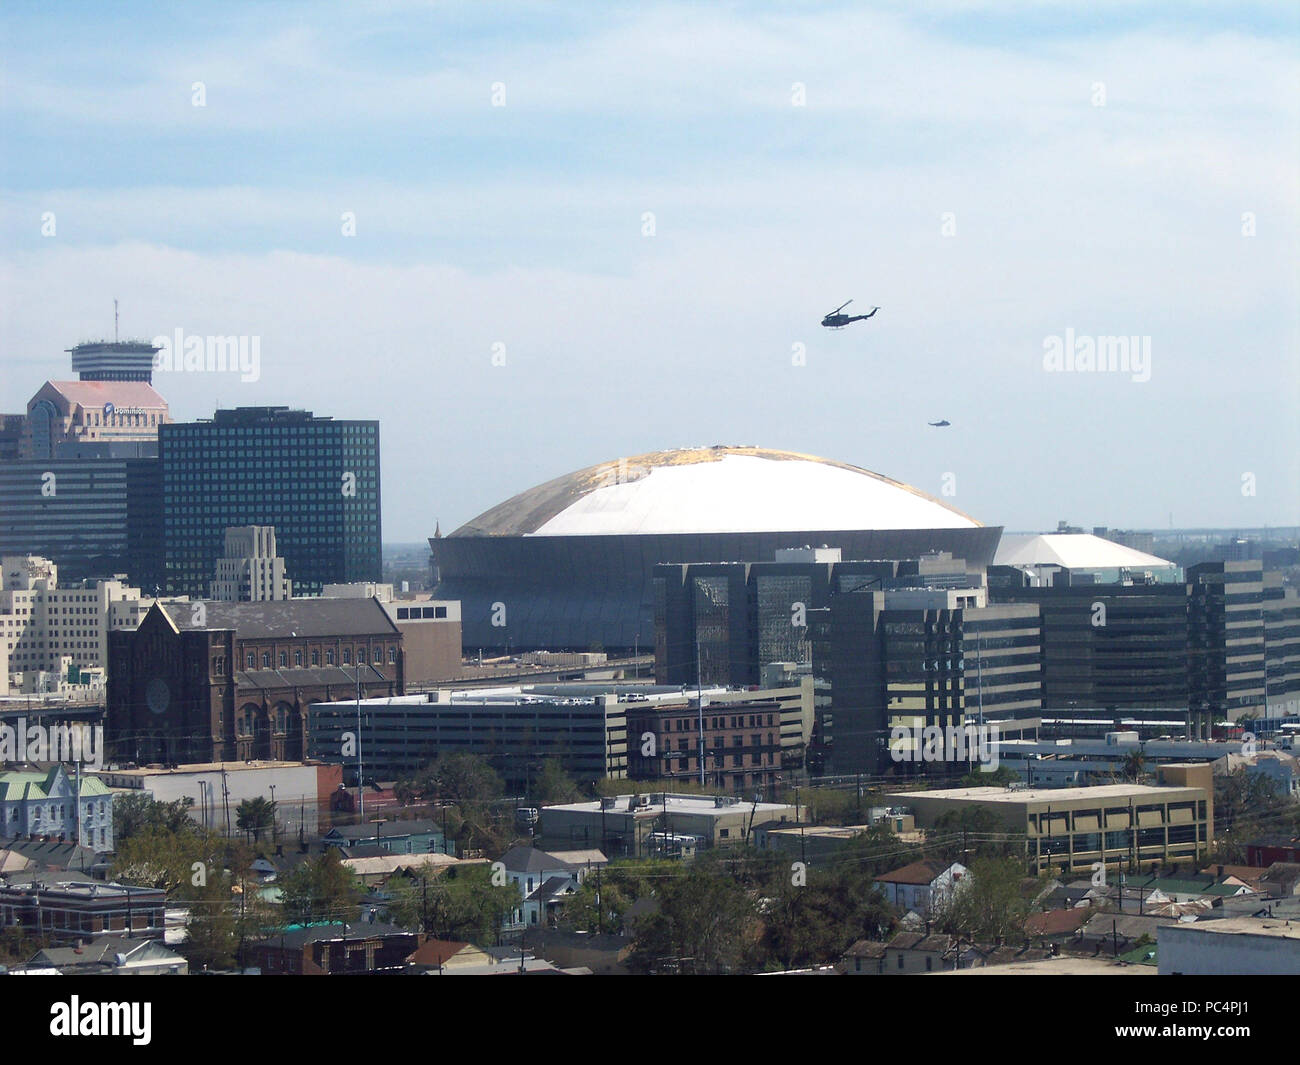 Hurricane Katrina Aftermath - wide view of helicopter flying near Superdome and other city buildings Stock Photo